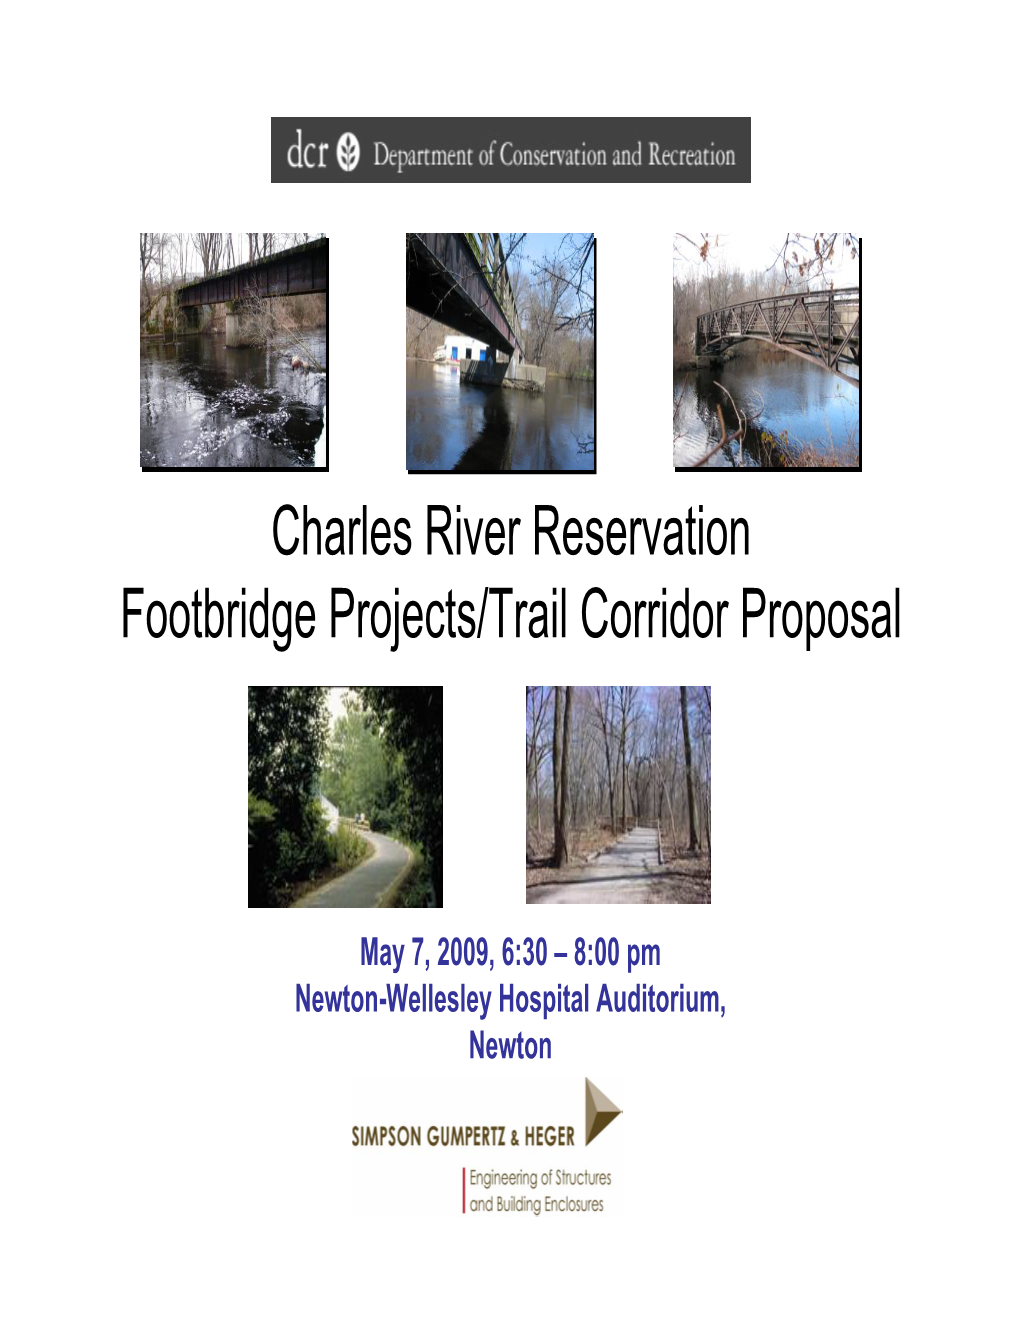 Charles River Reservation Footbridge Projects/Trail Corridor Proposal